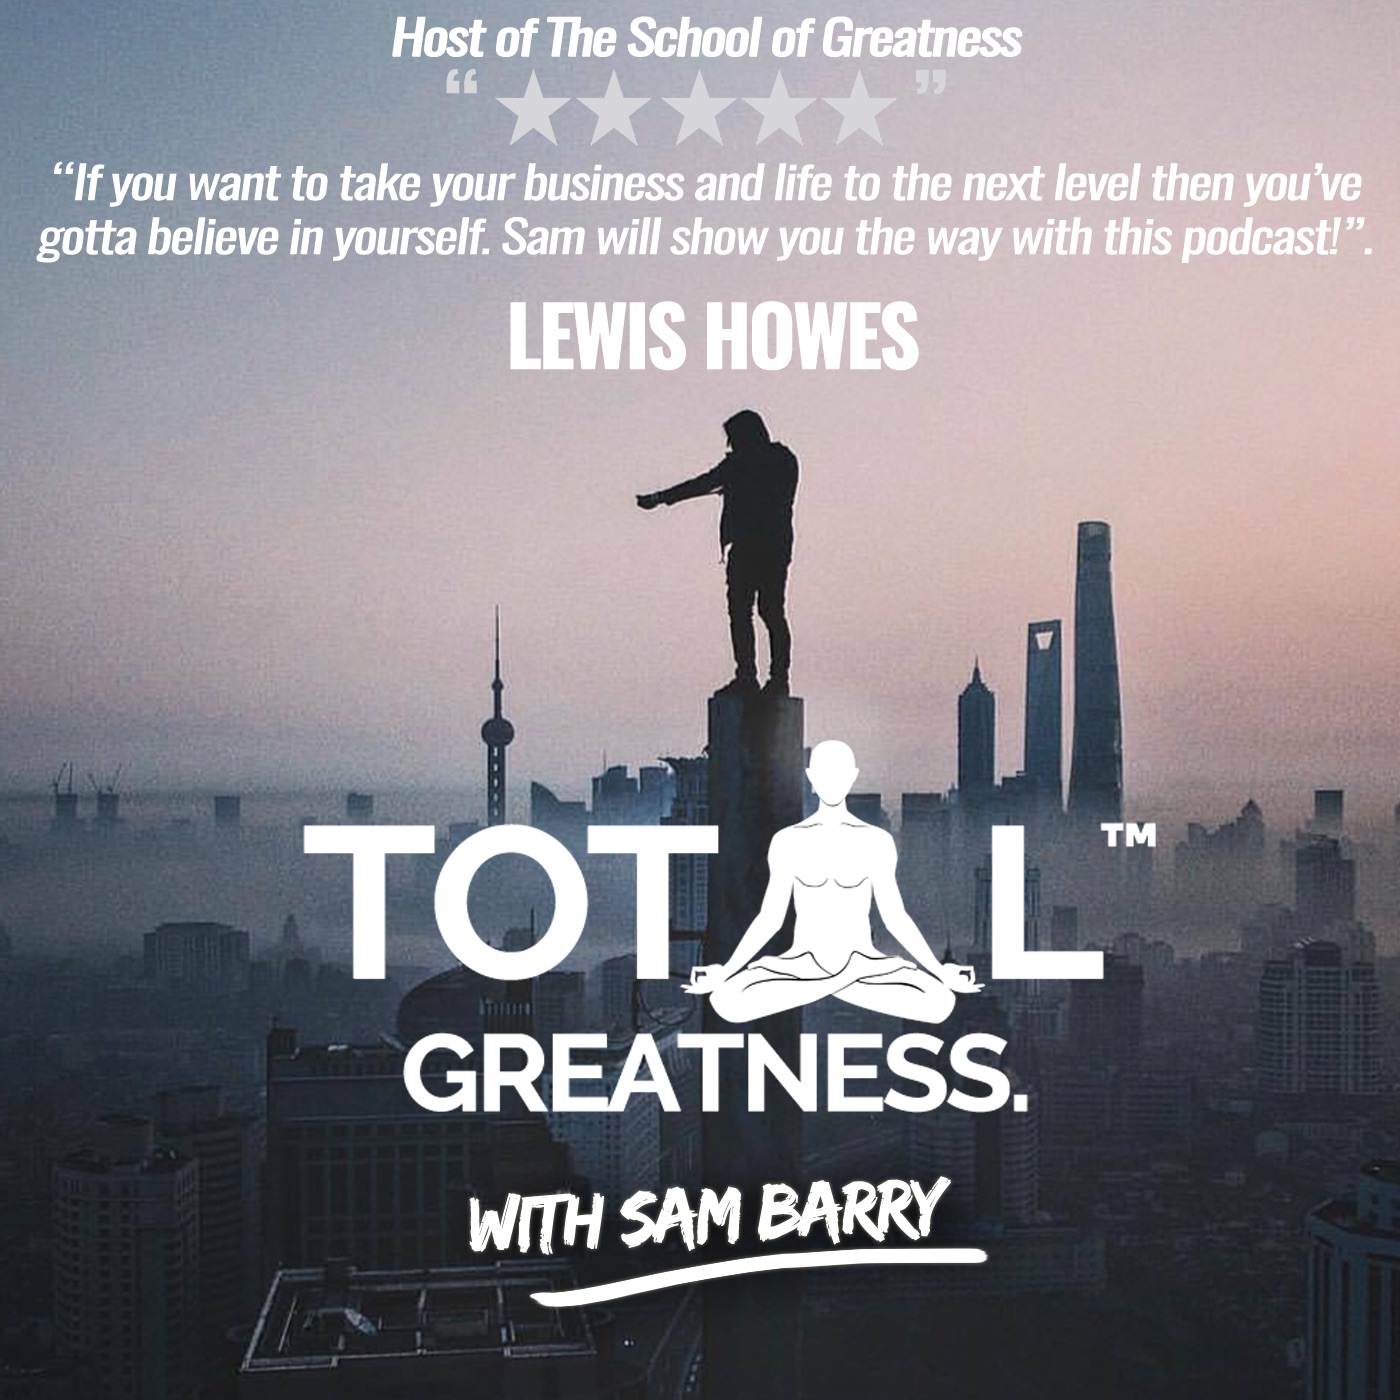 Total Greatness with Sam Barry | Interviewing World Class Guests in Health, Wealth & Spirituality